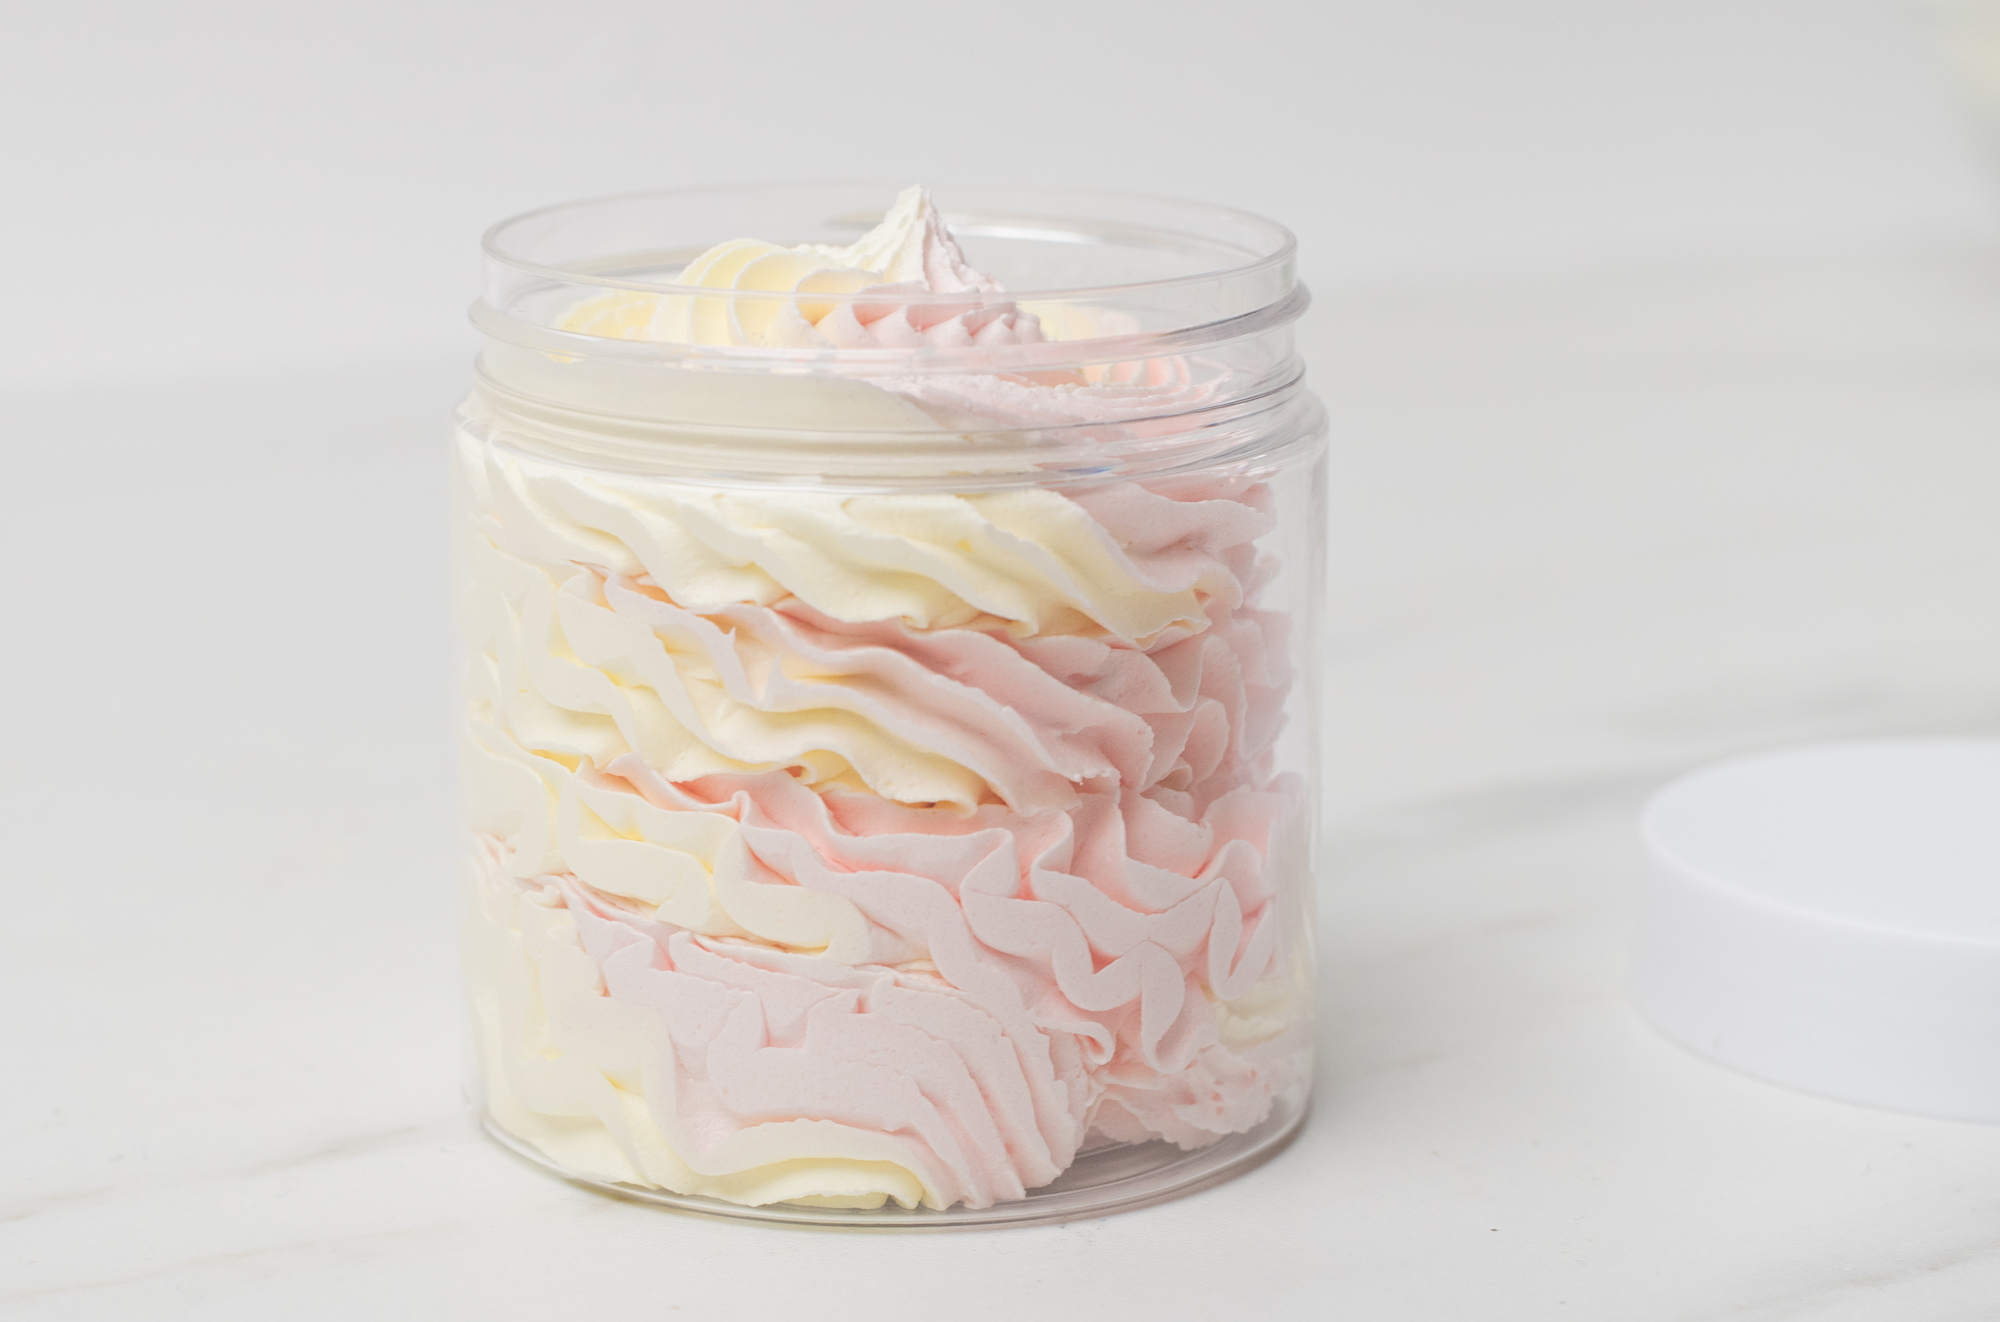 Whipped soap piped in a jar.